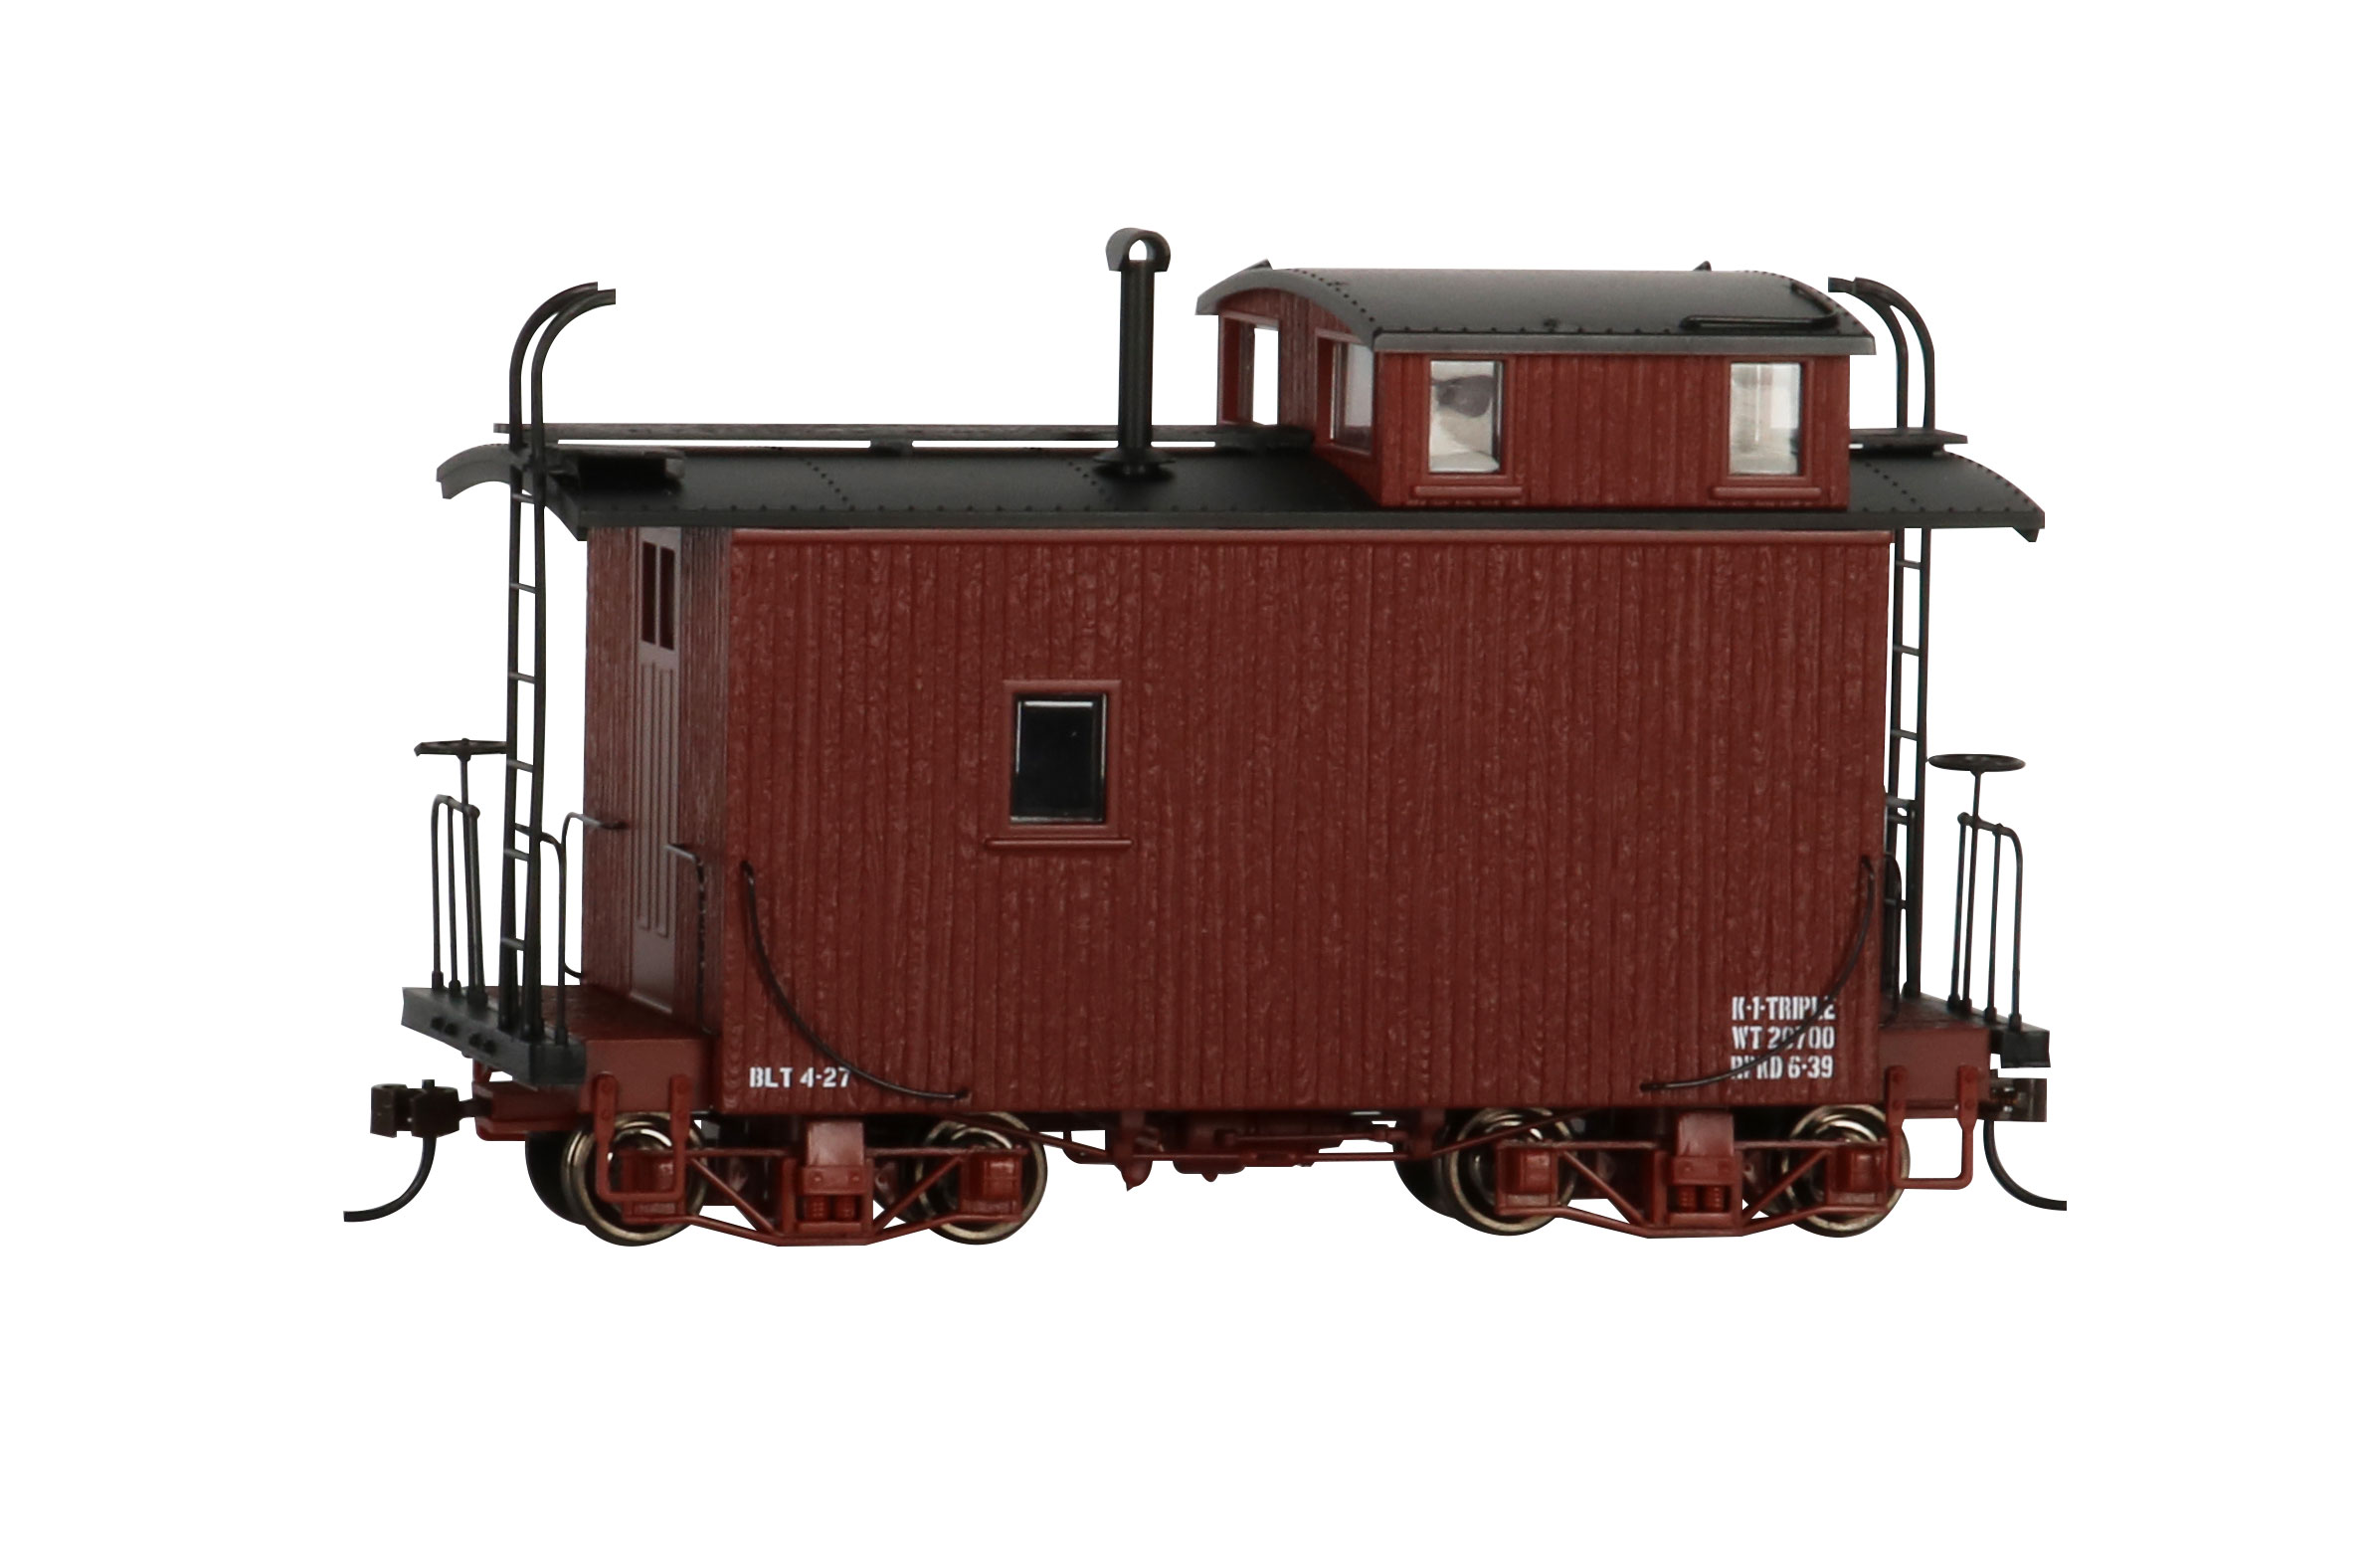 18 ft. Off-Set Cupola Caboose - Oxide Red, Data Only (On30)